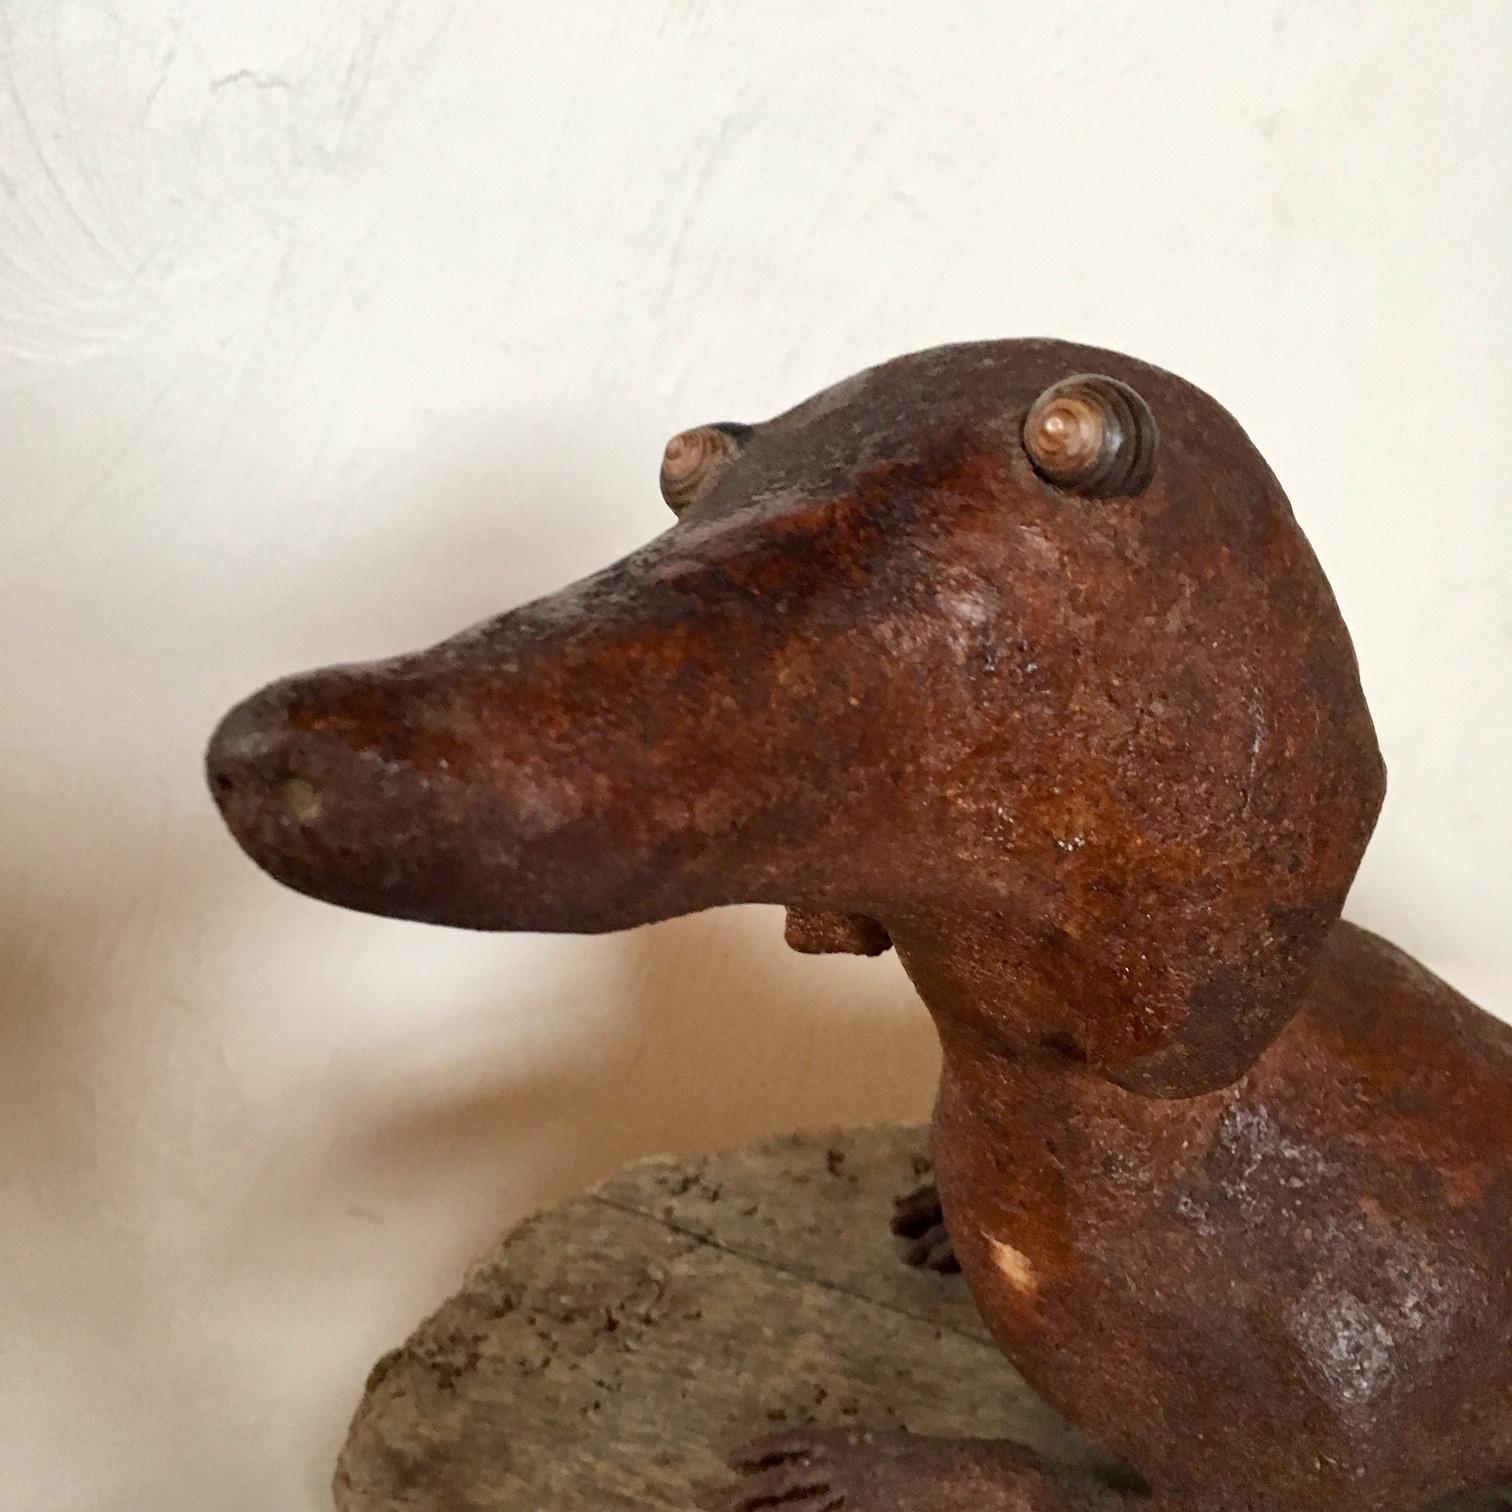 Early 20th century Folk Art driftwood dachshund, circa 1920, a natural form piece of driftwood that has been augmented with the addition of inset Periwinkle shell eyes, two drilled nares at tip of snout, modeled (clay?) ears, legs and paws, all